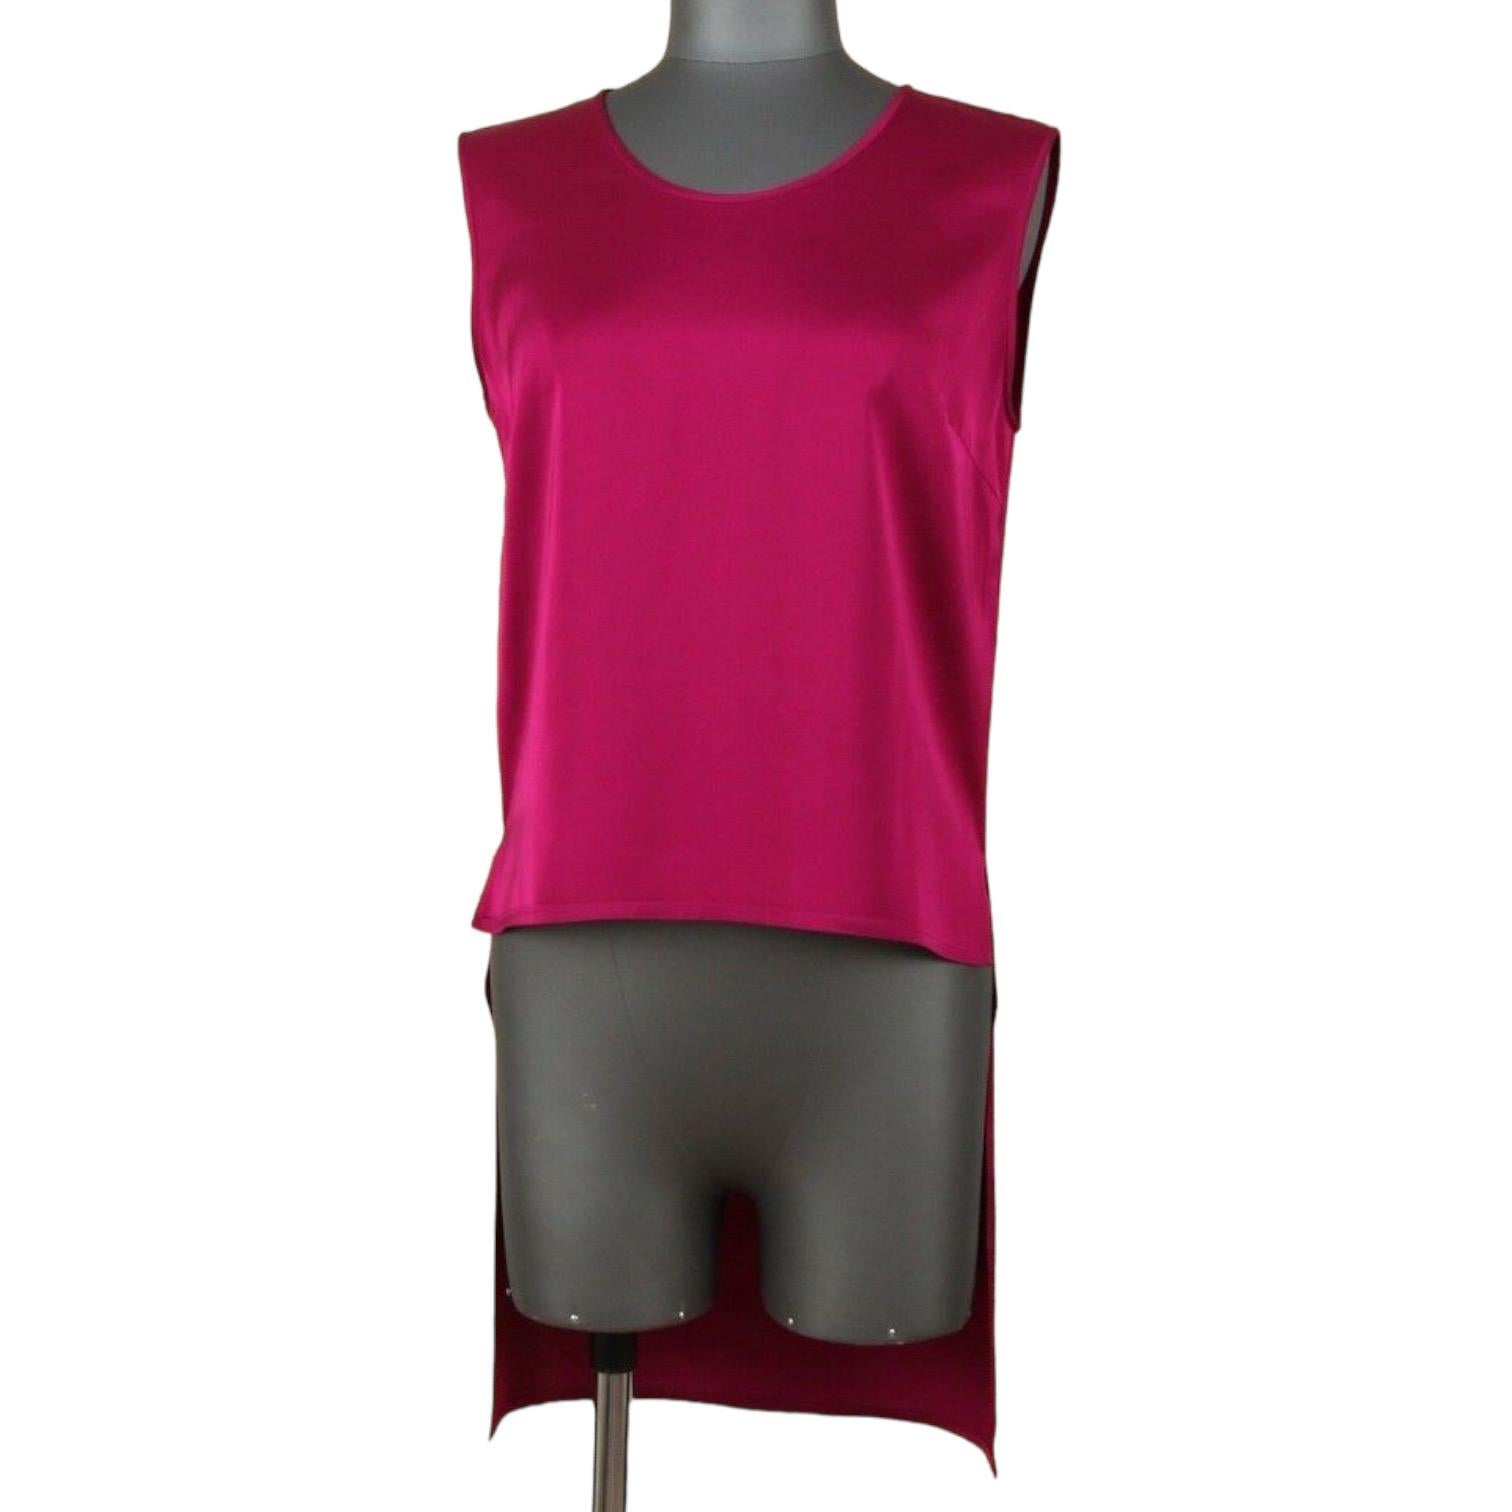 STELLA MCCARTNEY Sleeveless Tunic Blouse Shirt Top Red Viscose Scoop Neck Sz 38 In Good Condition For Sale In Hollywood, FL